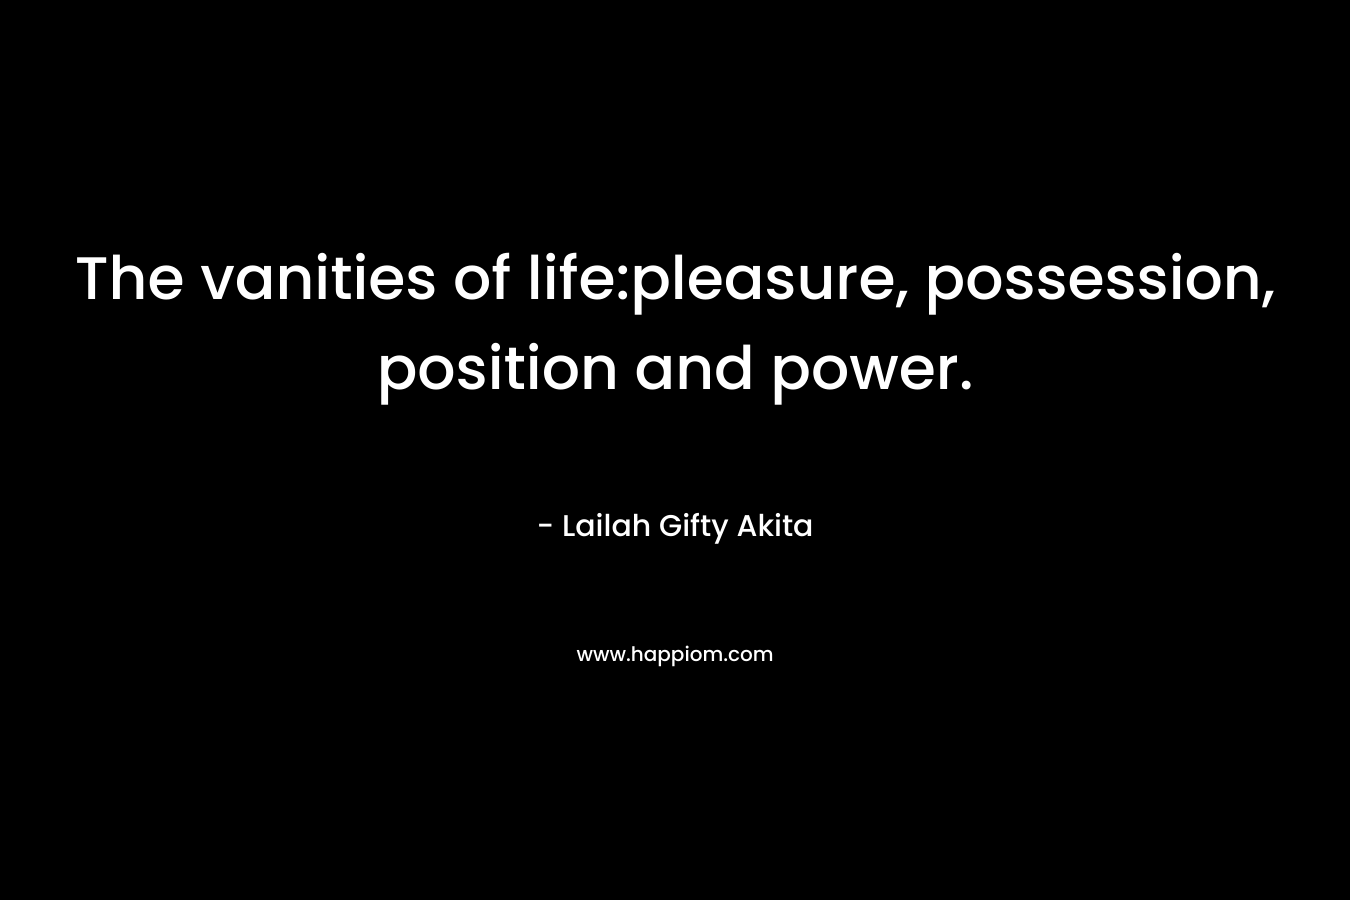 The vanities of life:pleasure, possession, position and power. – Lailah Gifty Akita